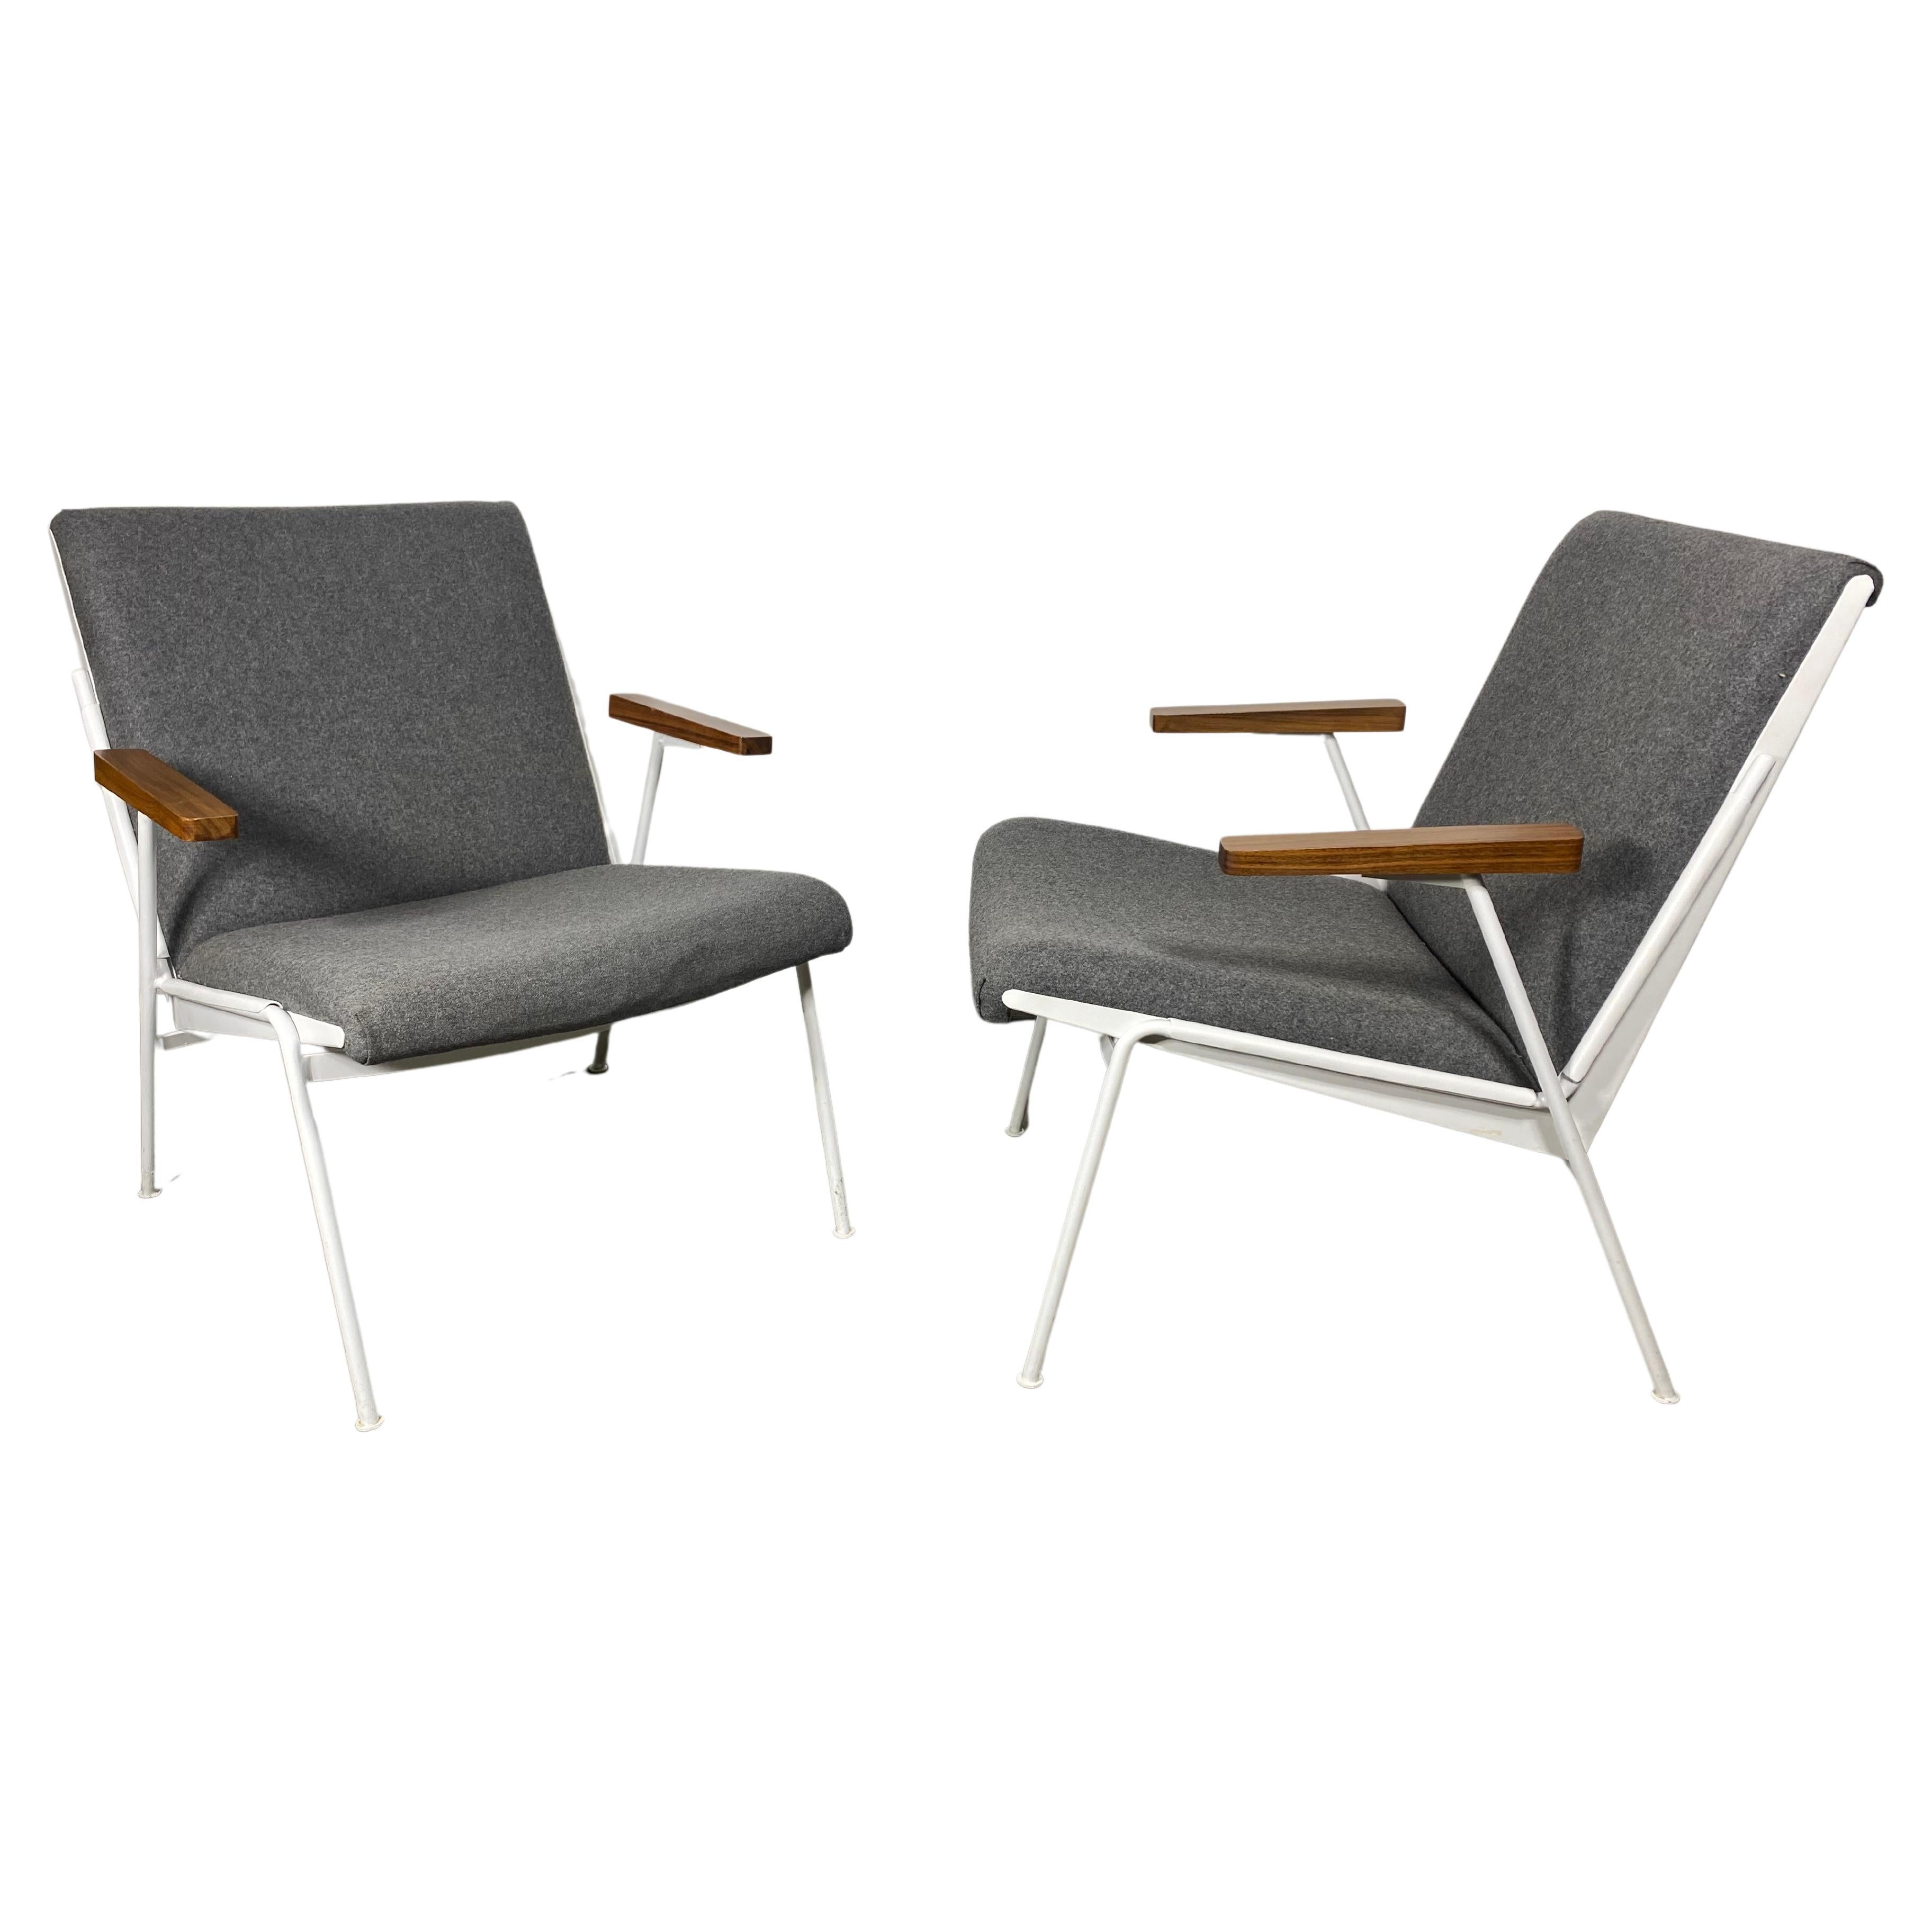 Pair 1959, Wim Rietveld for Ahrend de Cirkel, Oase Chairs, , classic modernist For Sale